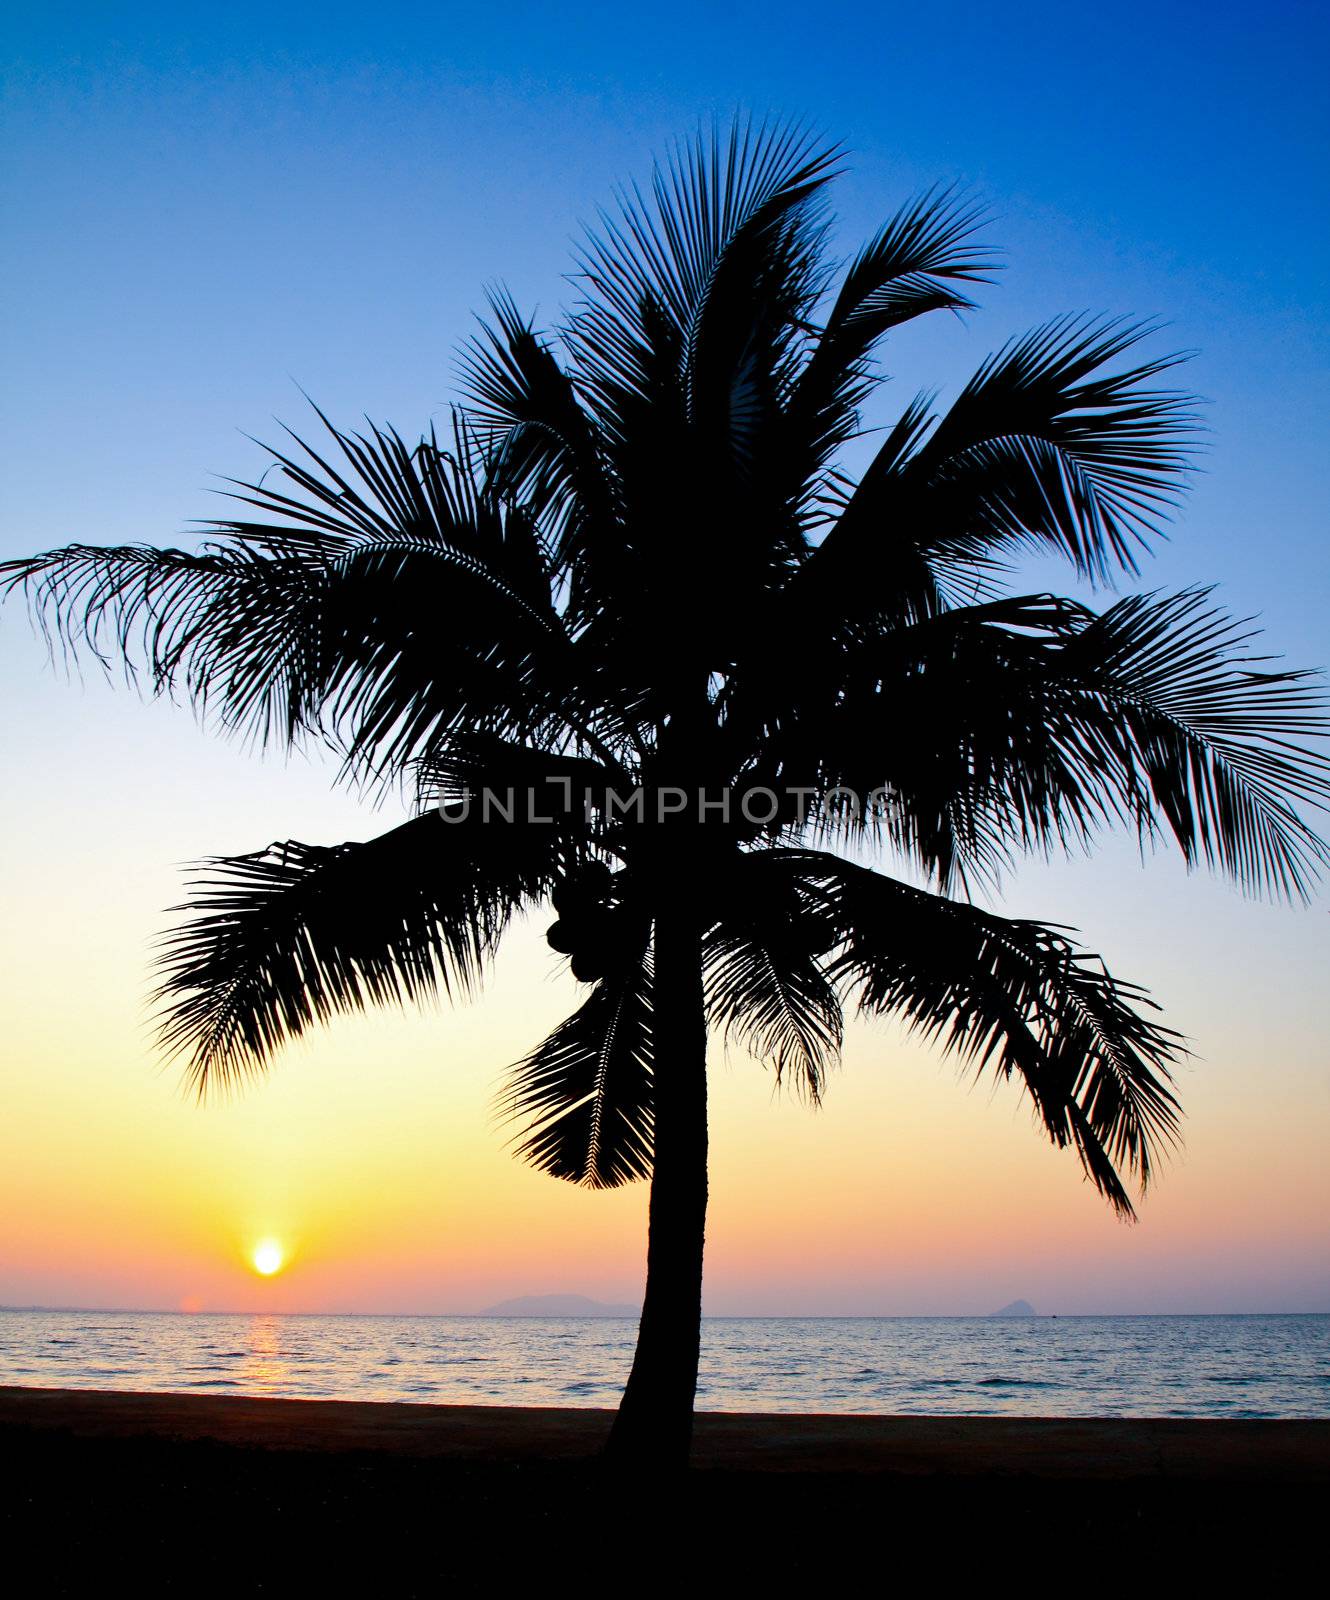 Coconut palm tree silhouetted against sky at sunrise